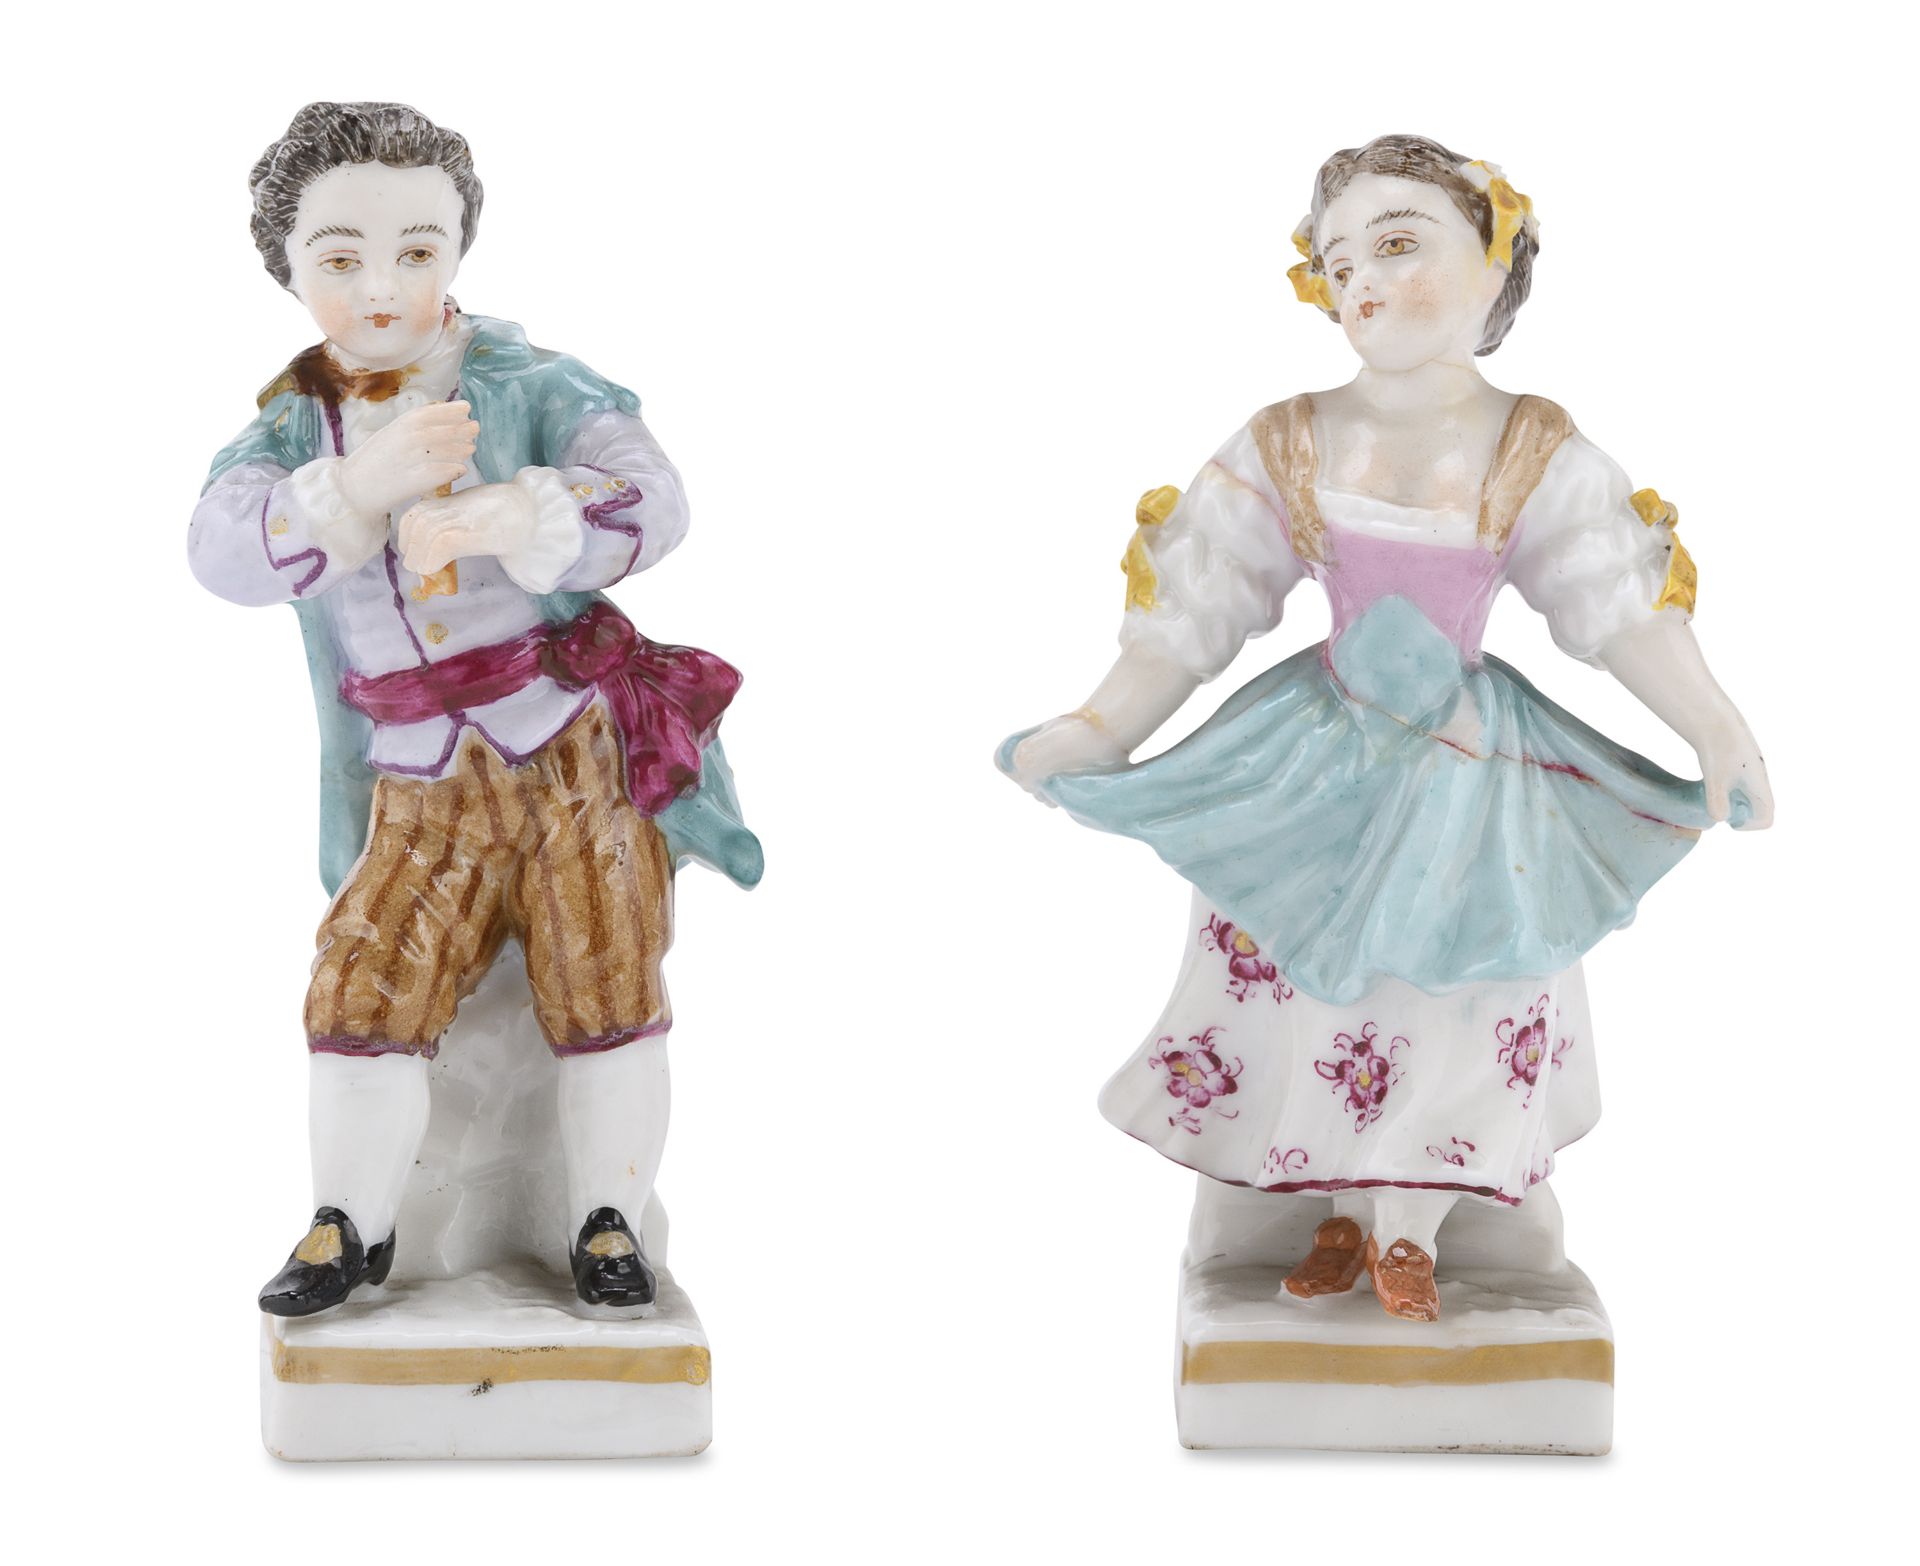 PAIR OF PORCELAIN FIGURINES PROBABLY GERMAN BRAND EARLY 19TH CENTURY